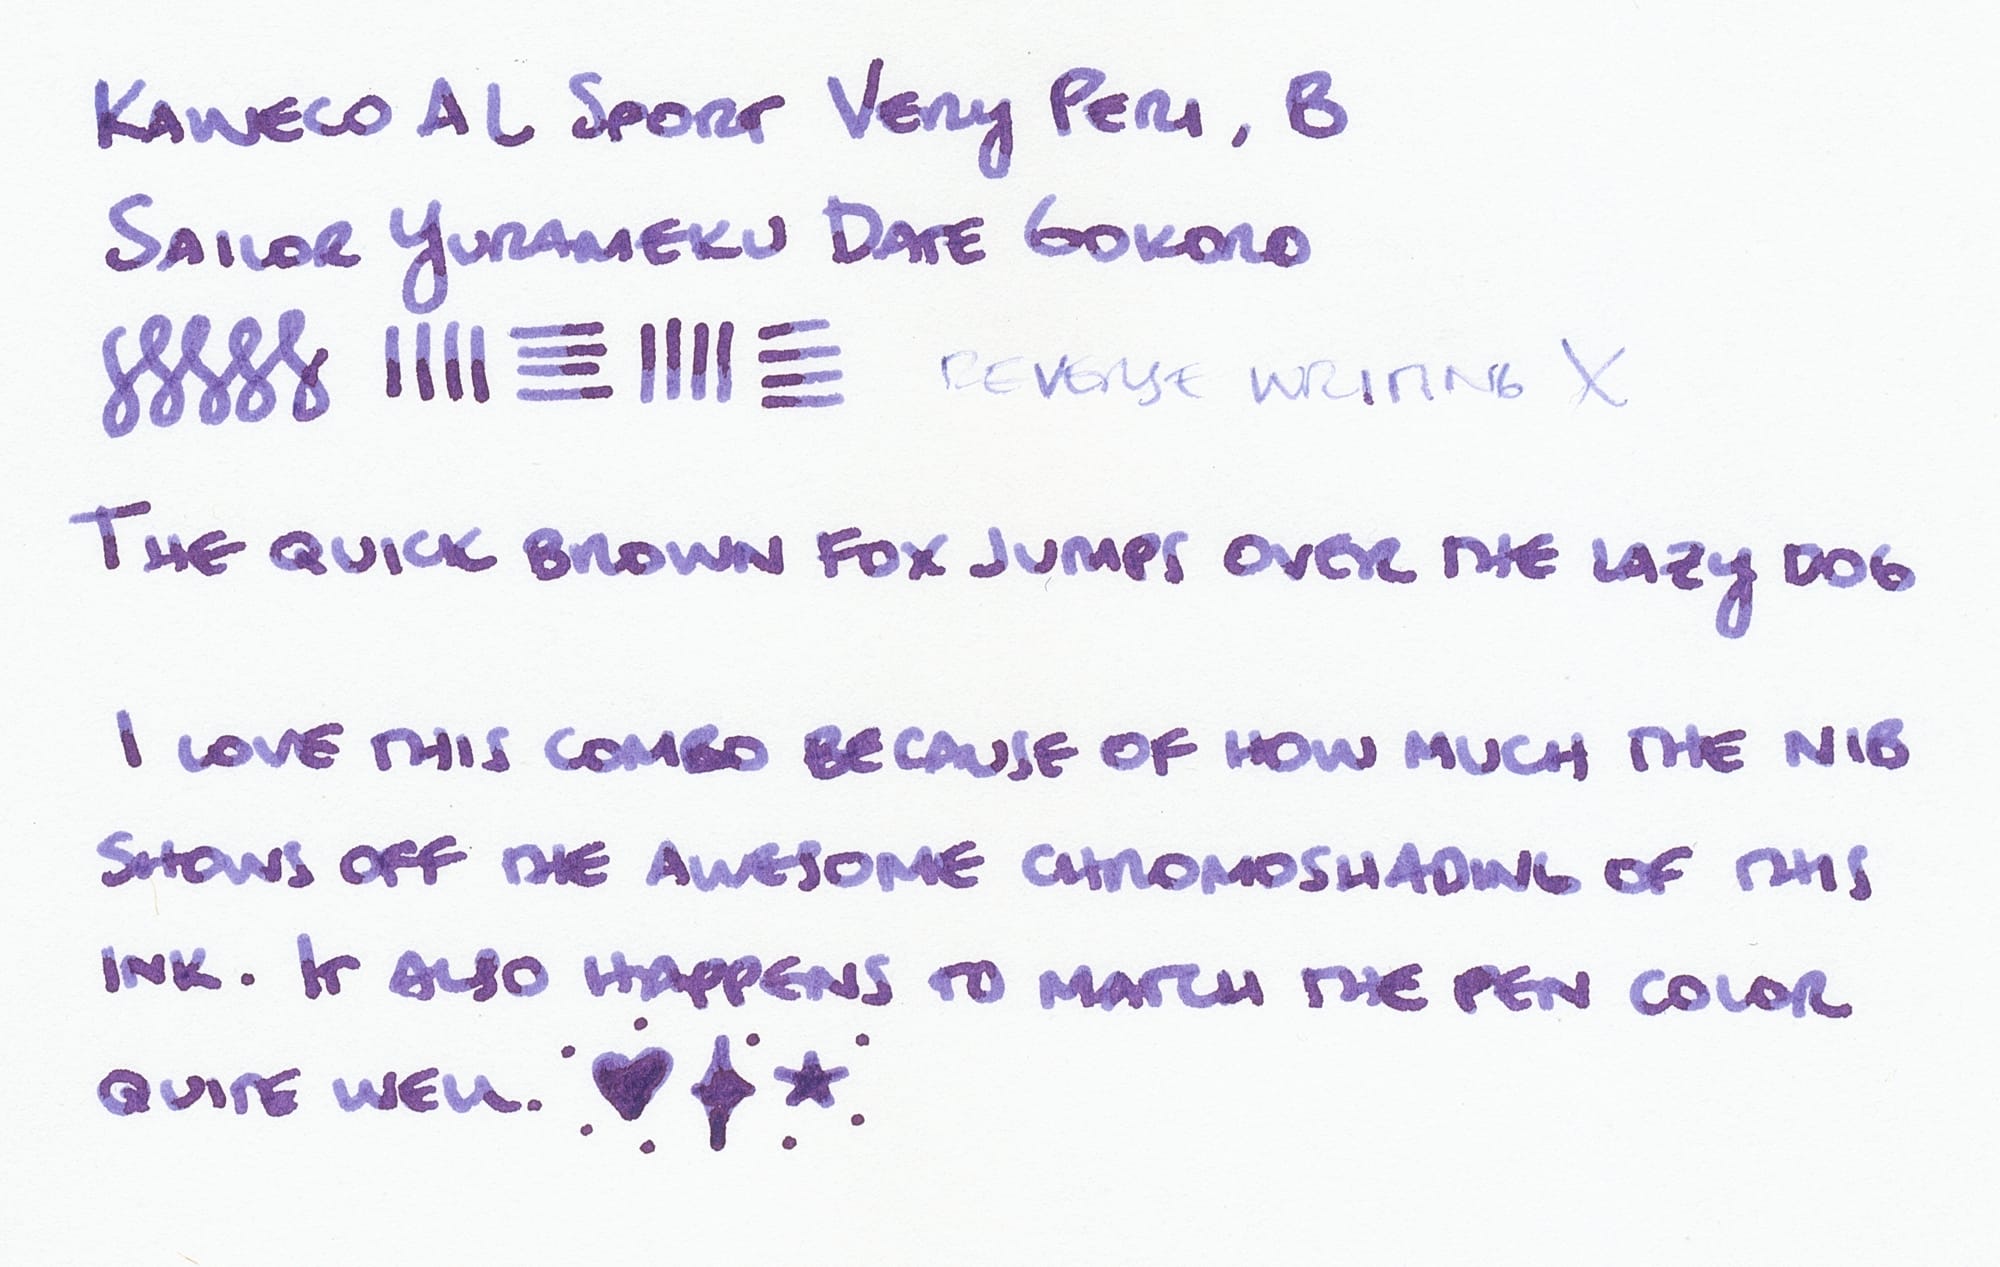 Scan of a writing sample using a bluish purple ink in a fountain pen with a broad nib (transcription below)